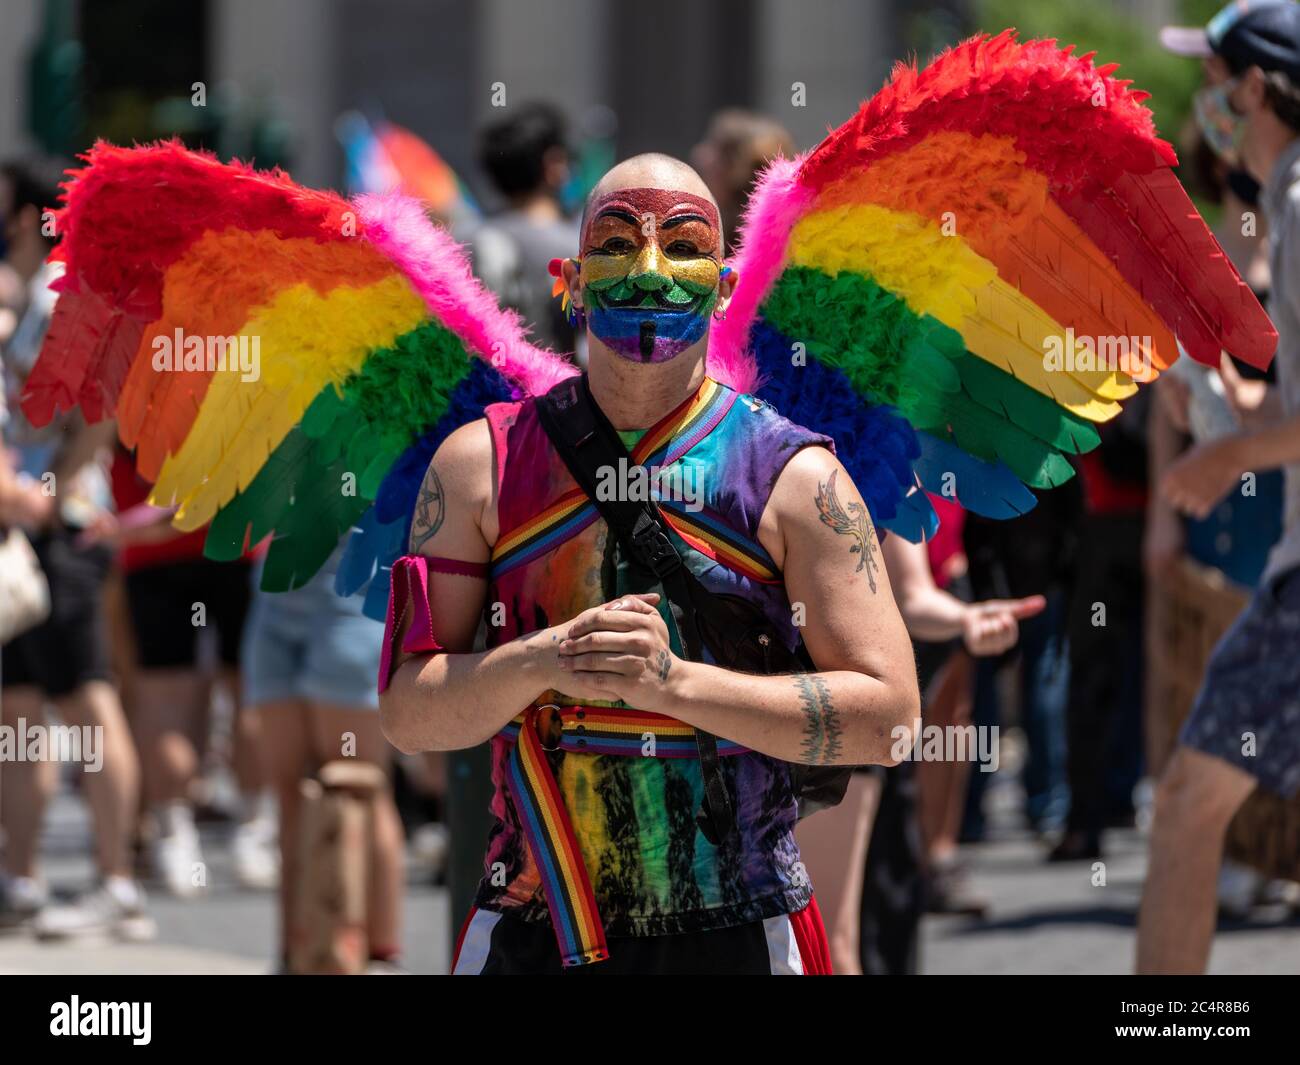 New York, New York, USA. 28th June, 2020. New York, New York, U.S.: a man wears rainbow wings and celebrates the 50th anniversary of the NYC Pride March during a Queer Liberation March in support for Black Lives Matter and against police brutality at Foley Square. Credit: Corine Sciboz/ZUMA Wire/Alamy Live News Stock Photo